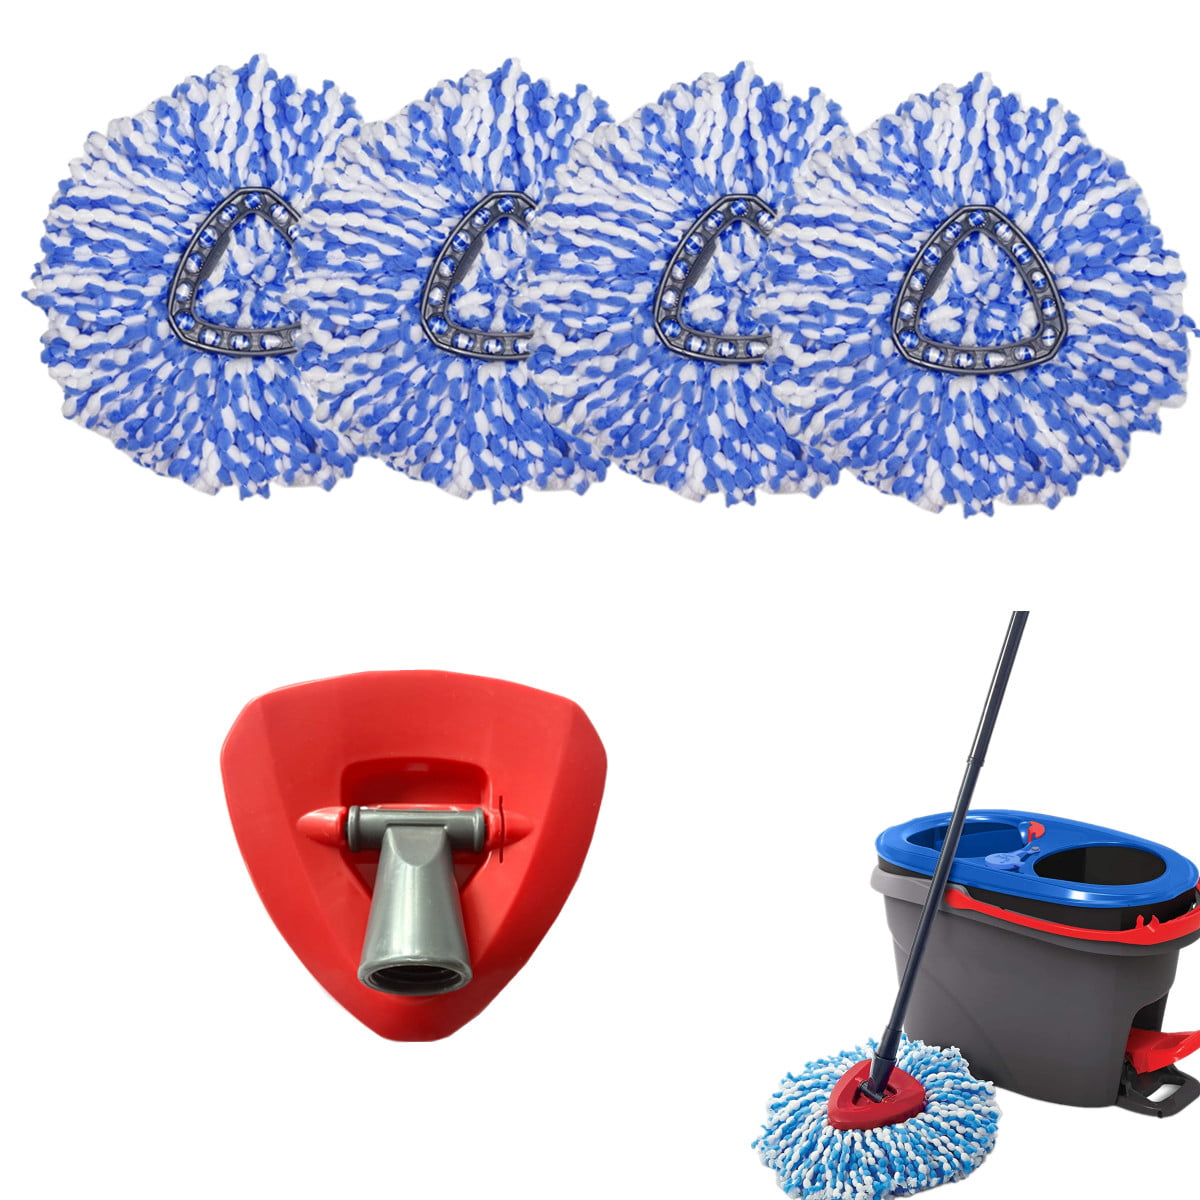 4 Microfiber Replacement Mop Head for Spin Mop 360° Rotating Spin Mop 